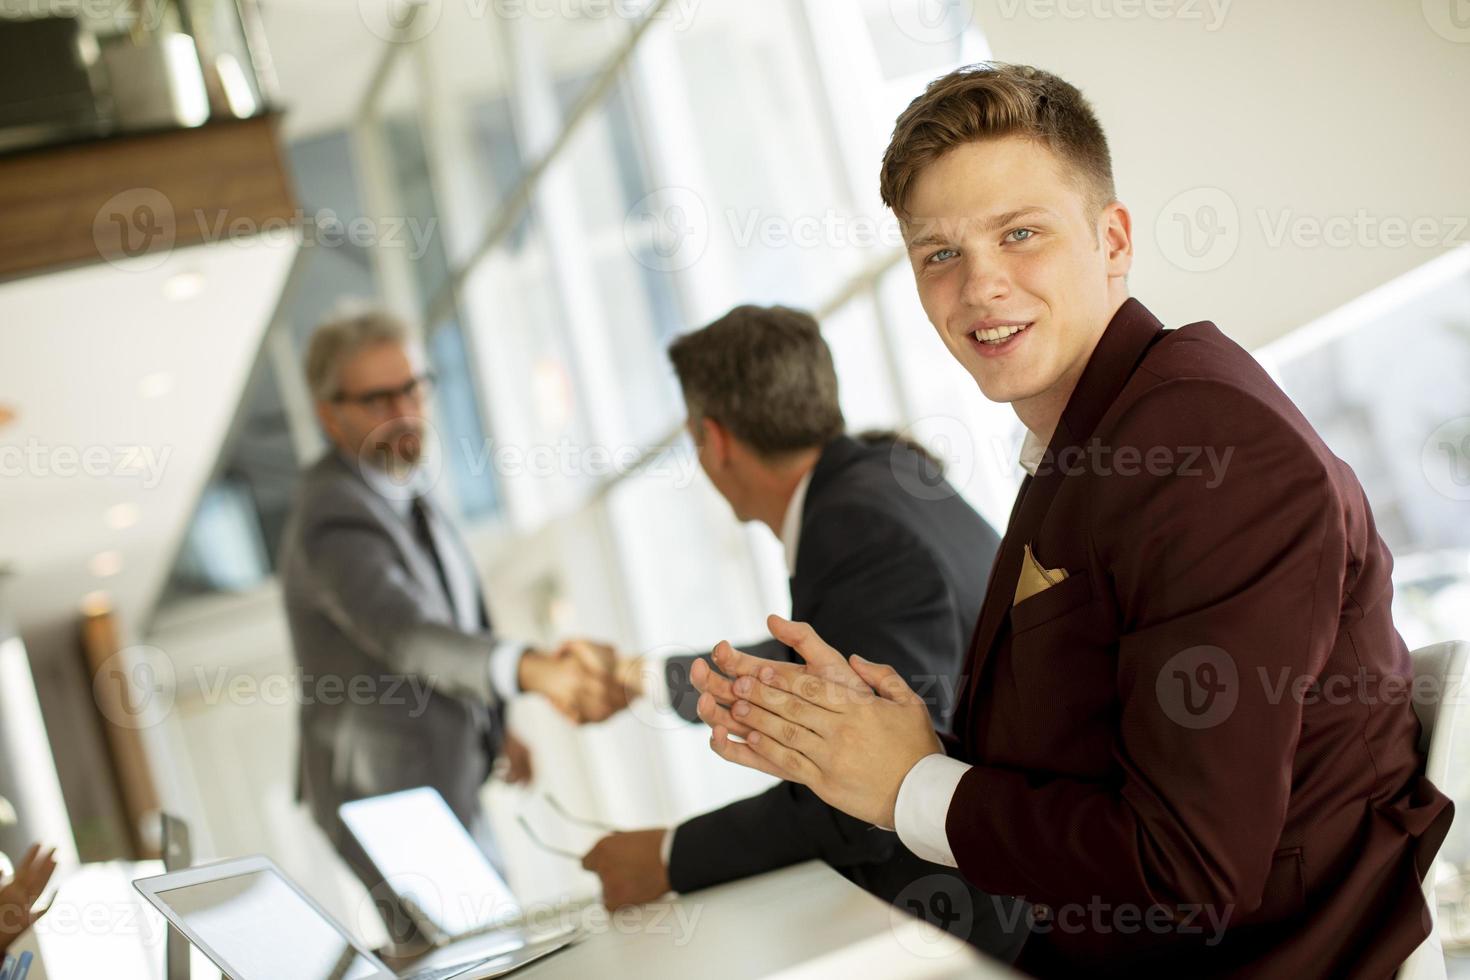 Man clapping hands in a meeting photo